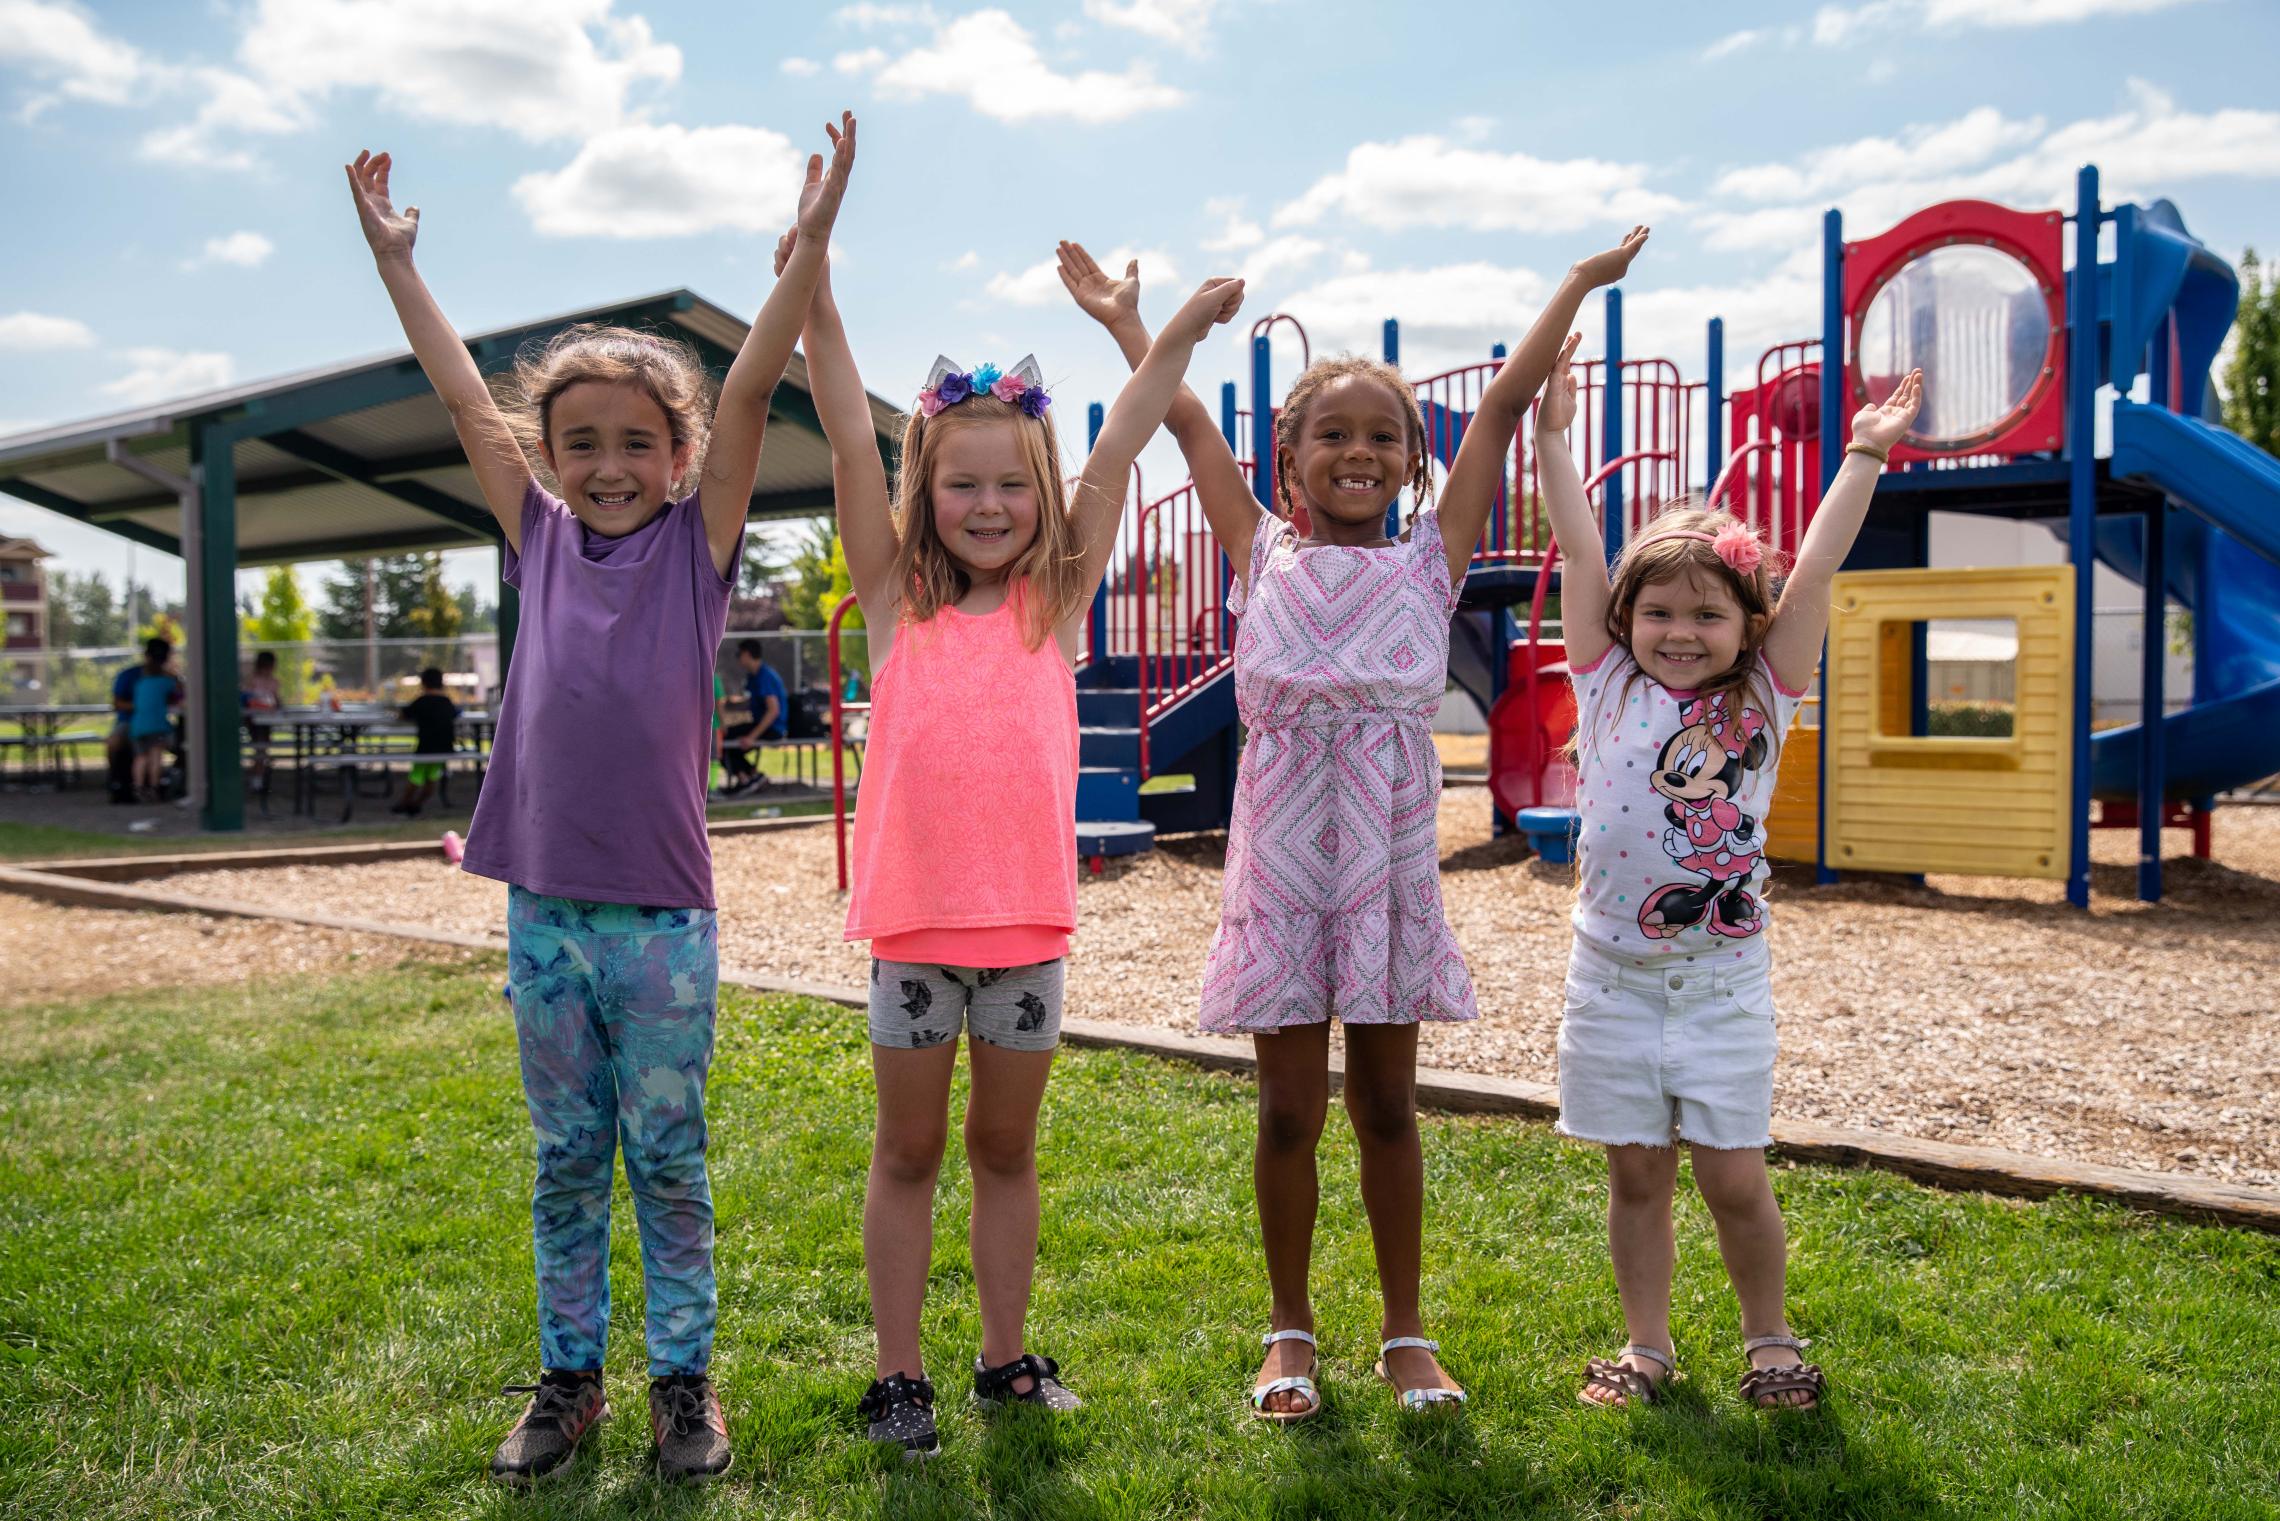 Day campers throw hands up in joy in front of the playground at the YMCA